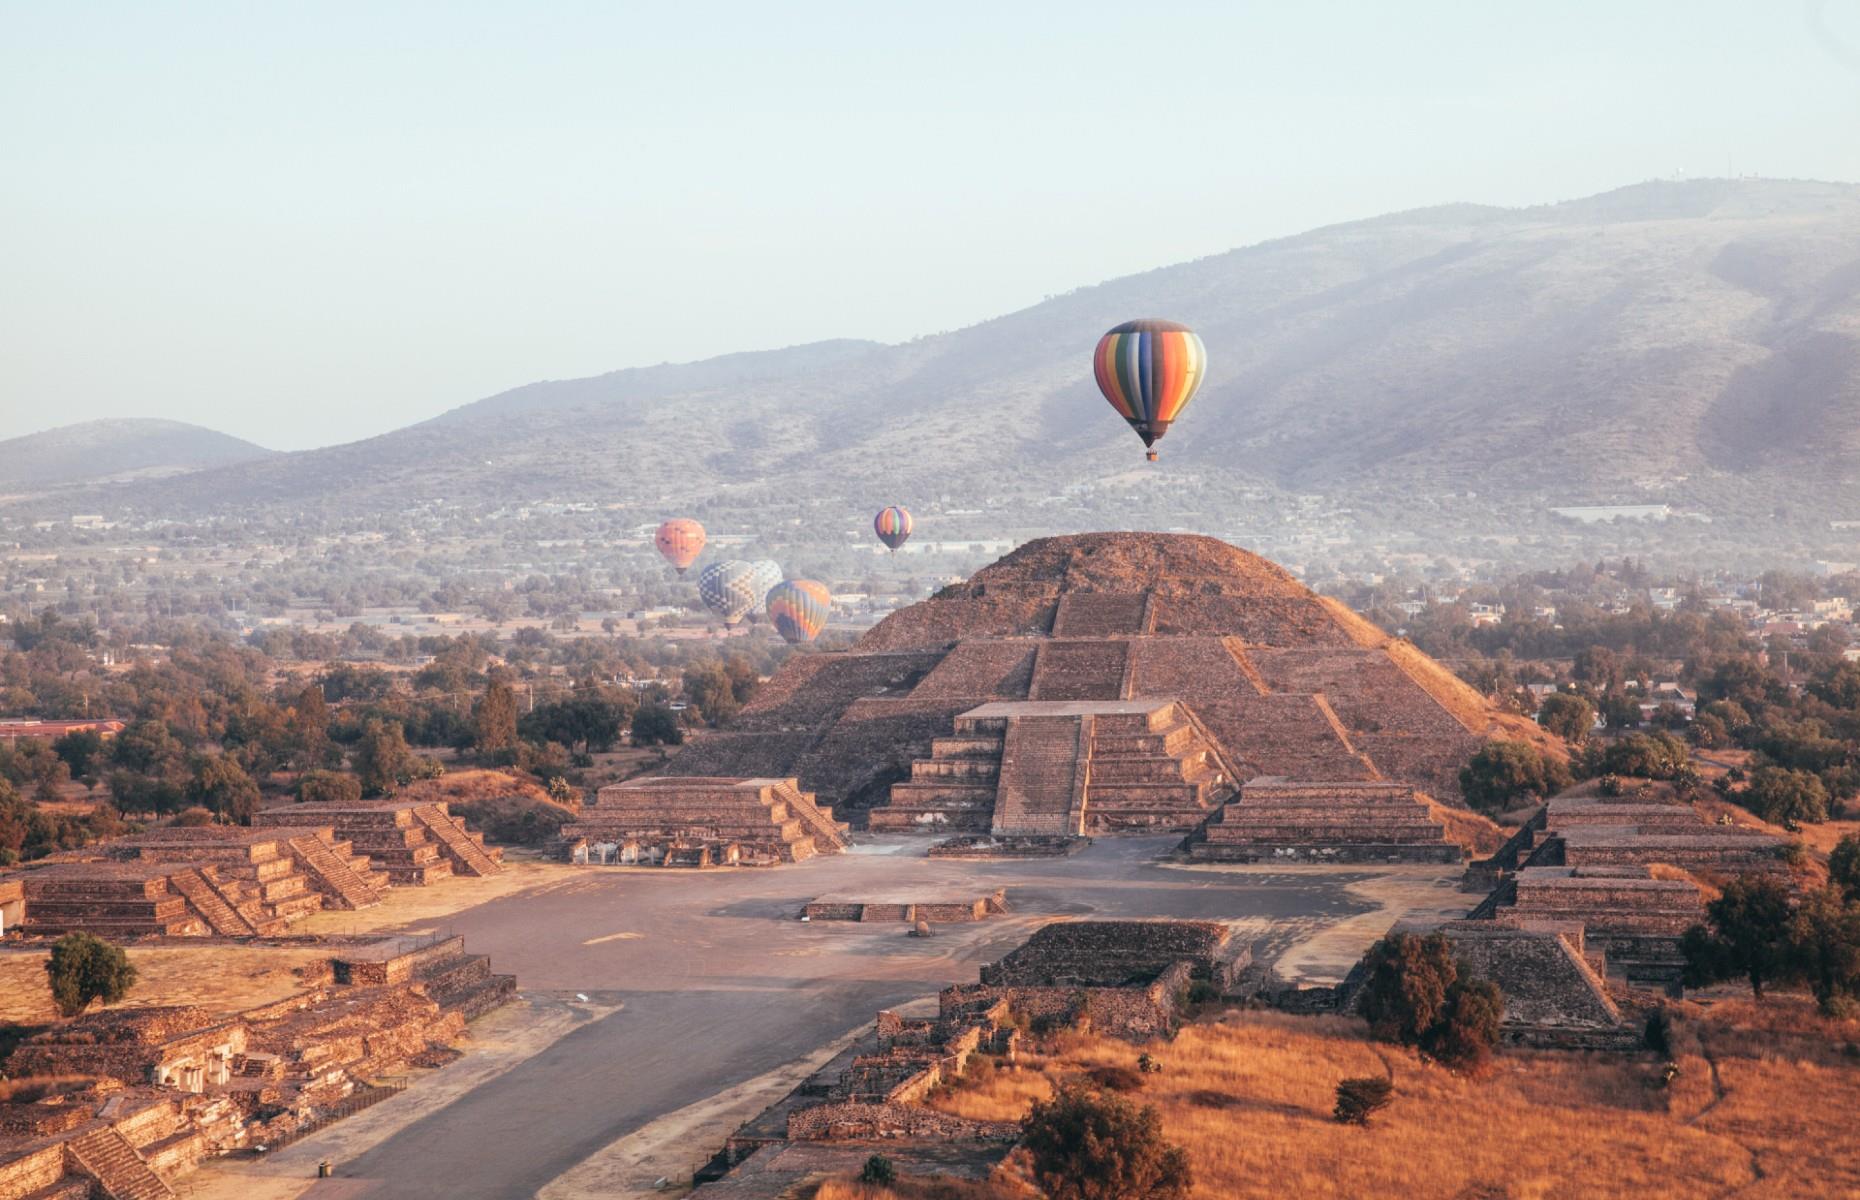 It's somewhat difficult to get your head around the scale and history of ancient Teotihuacan, a pre-Columbian city in the center of Mexico. That's why a hot air balloon flight is the ideal way to see it. Marvel at all of its ruins from the ultimate vantage point and you'll really be able to understand just how huge this city was. You'll see the three-mile-long (4.8km) Avenue of the Dead, connecting the two major pyramids and the sprawling modern town of San Martín de las Pirámides.